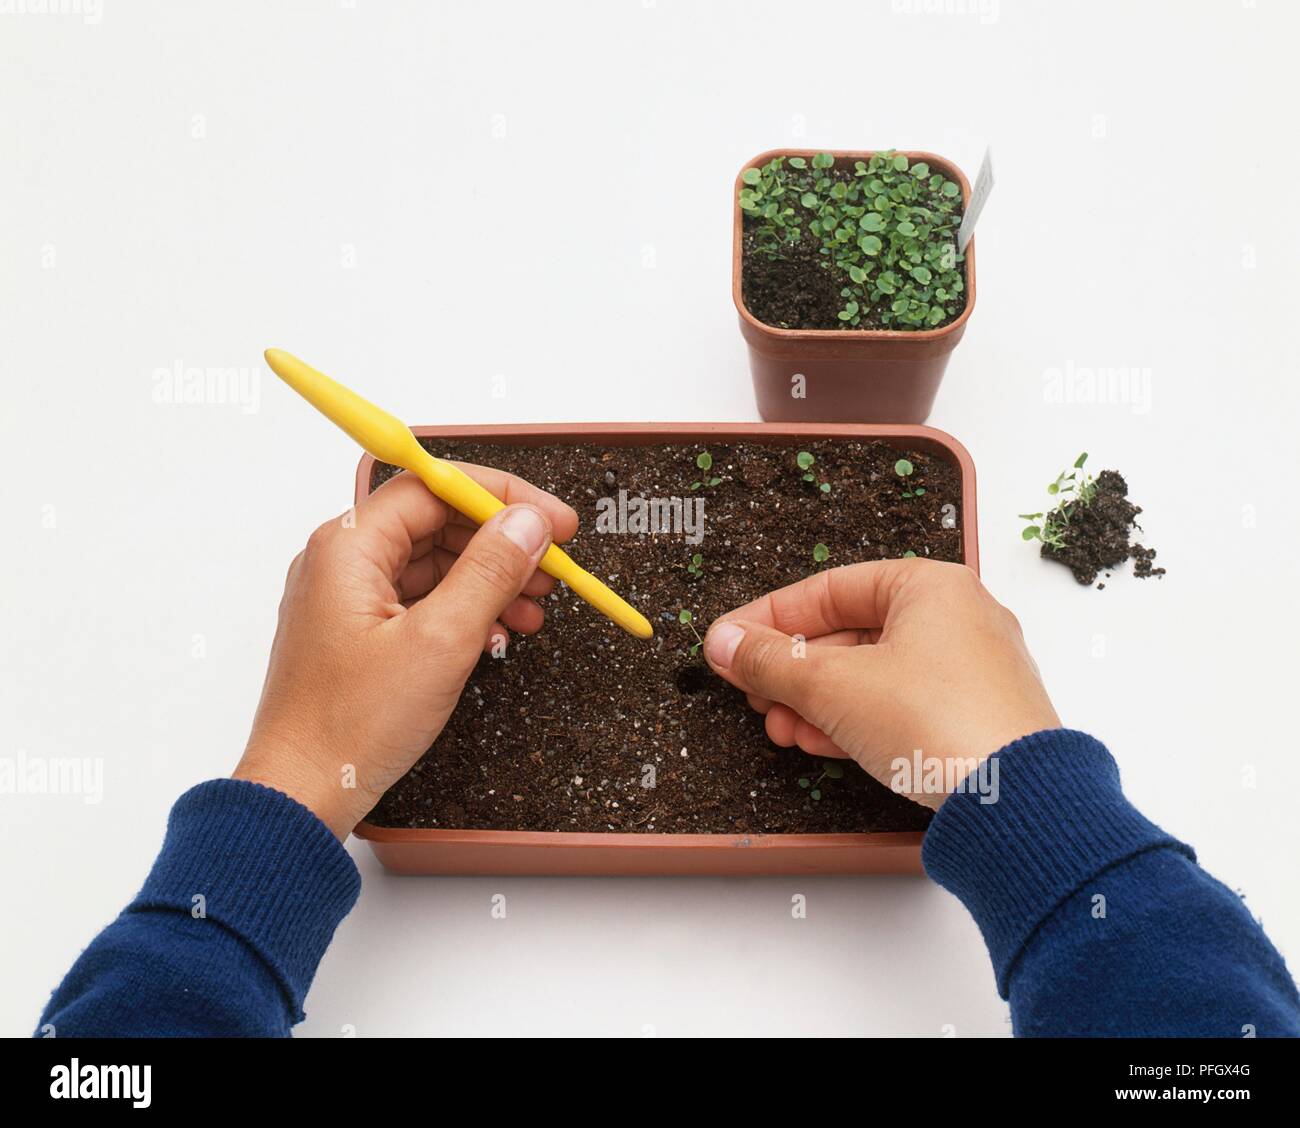 Using a dibber to plant Campanula seedlings in a tray, close-up Stock Photo